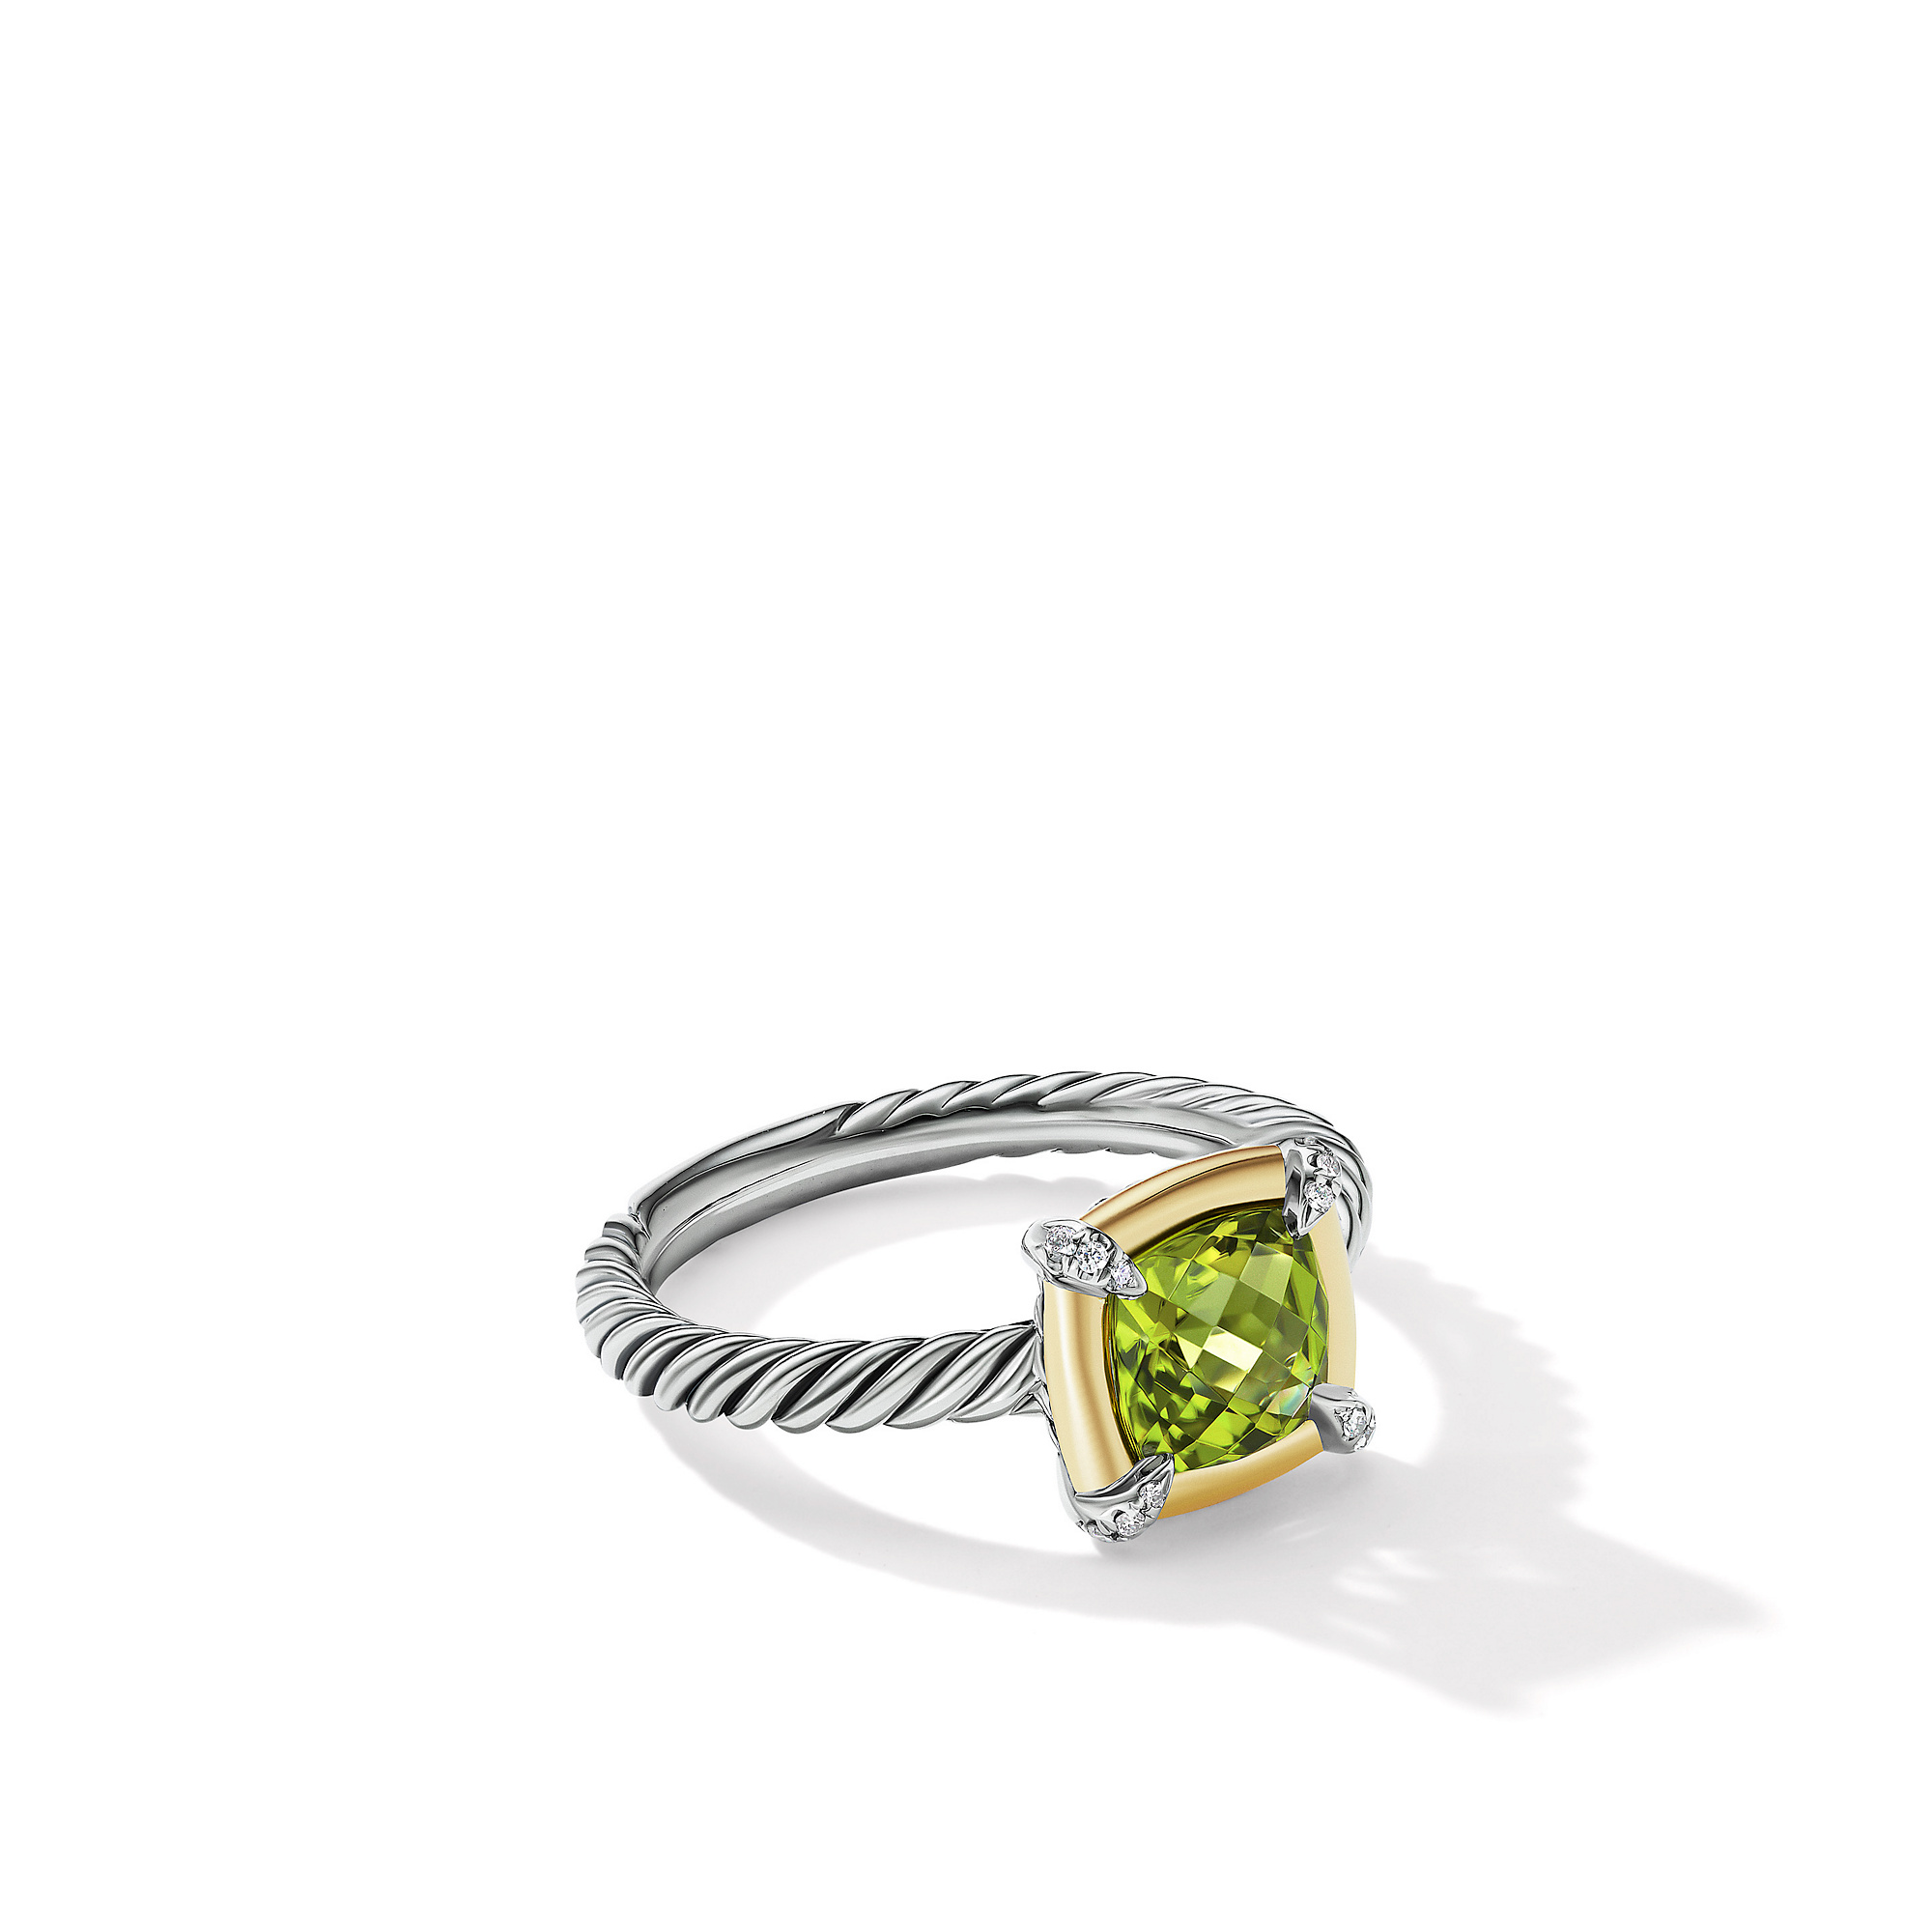 Petite Chatelaine® Ring in Sterling Silver with Peridot, 18K Yellow Gold and Pave Diamonds